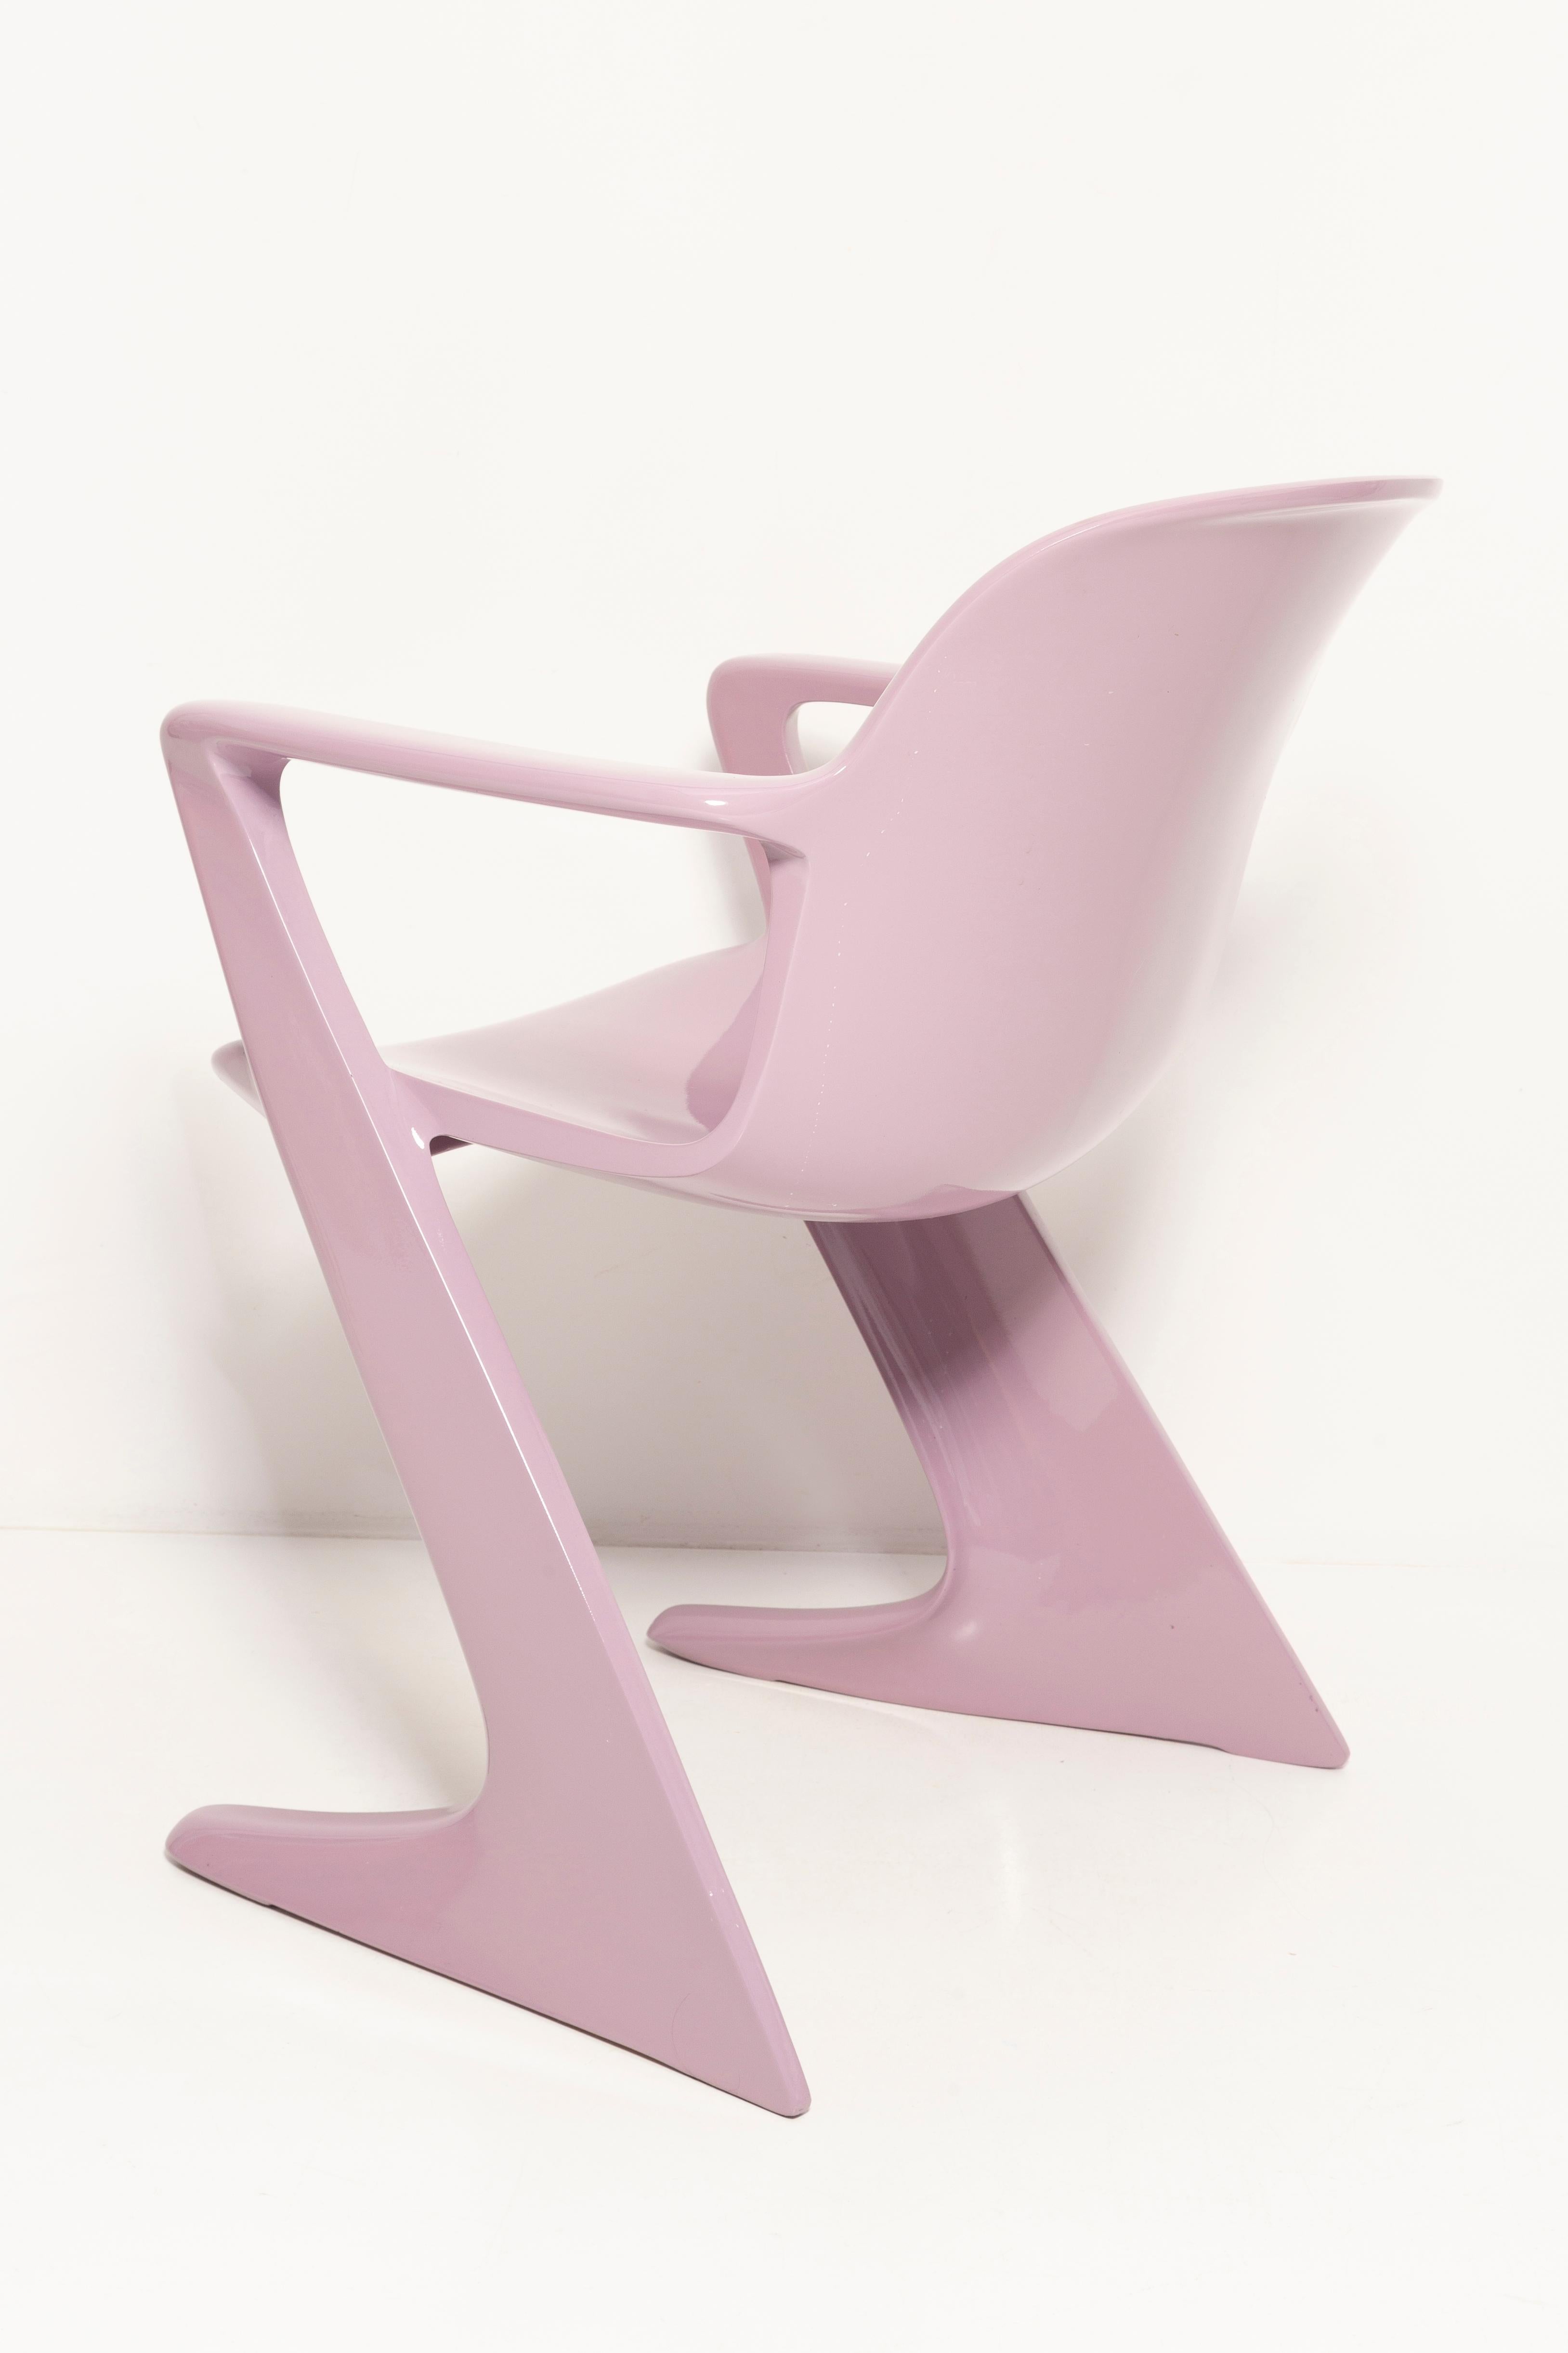 Four Mid-Century Lavender Kangaroo Chairs Designed by Ernst Moeckl Germany, 1968 For Sale 2